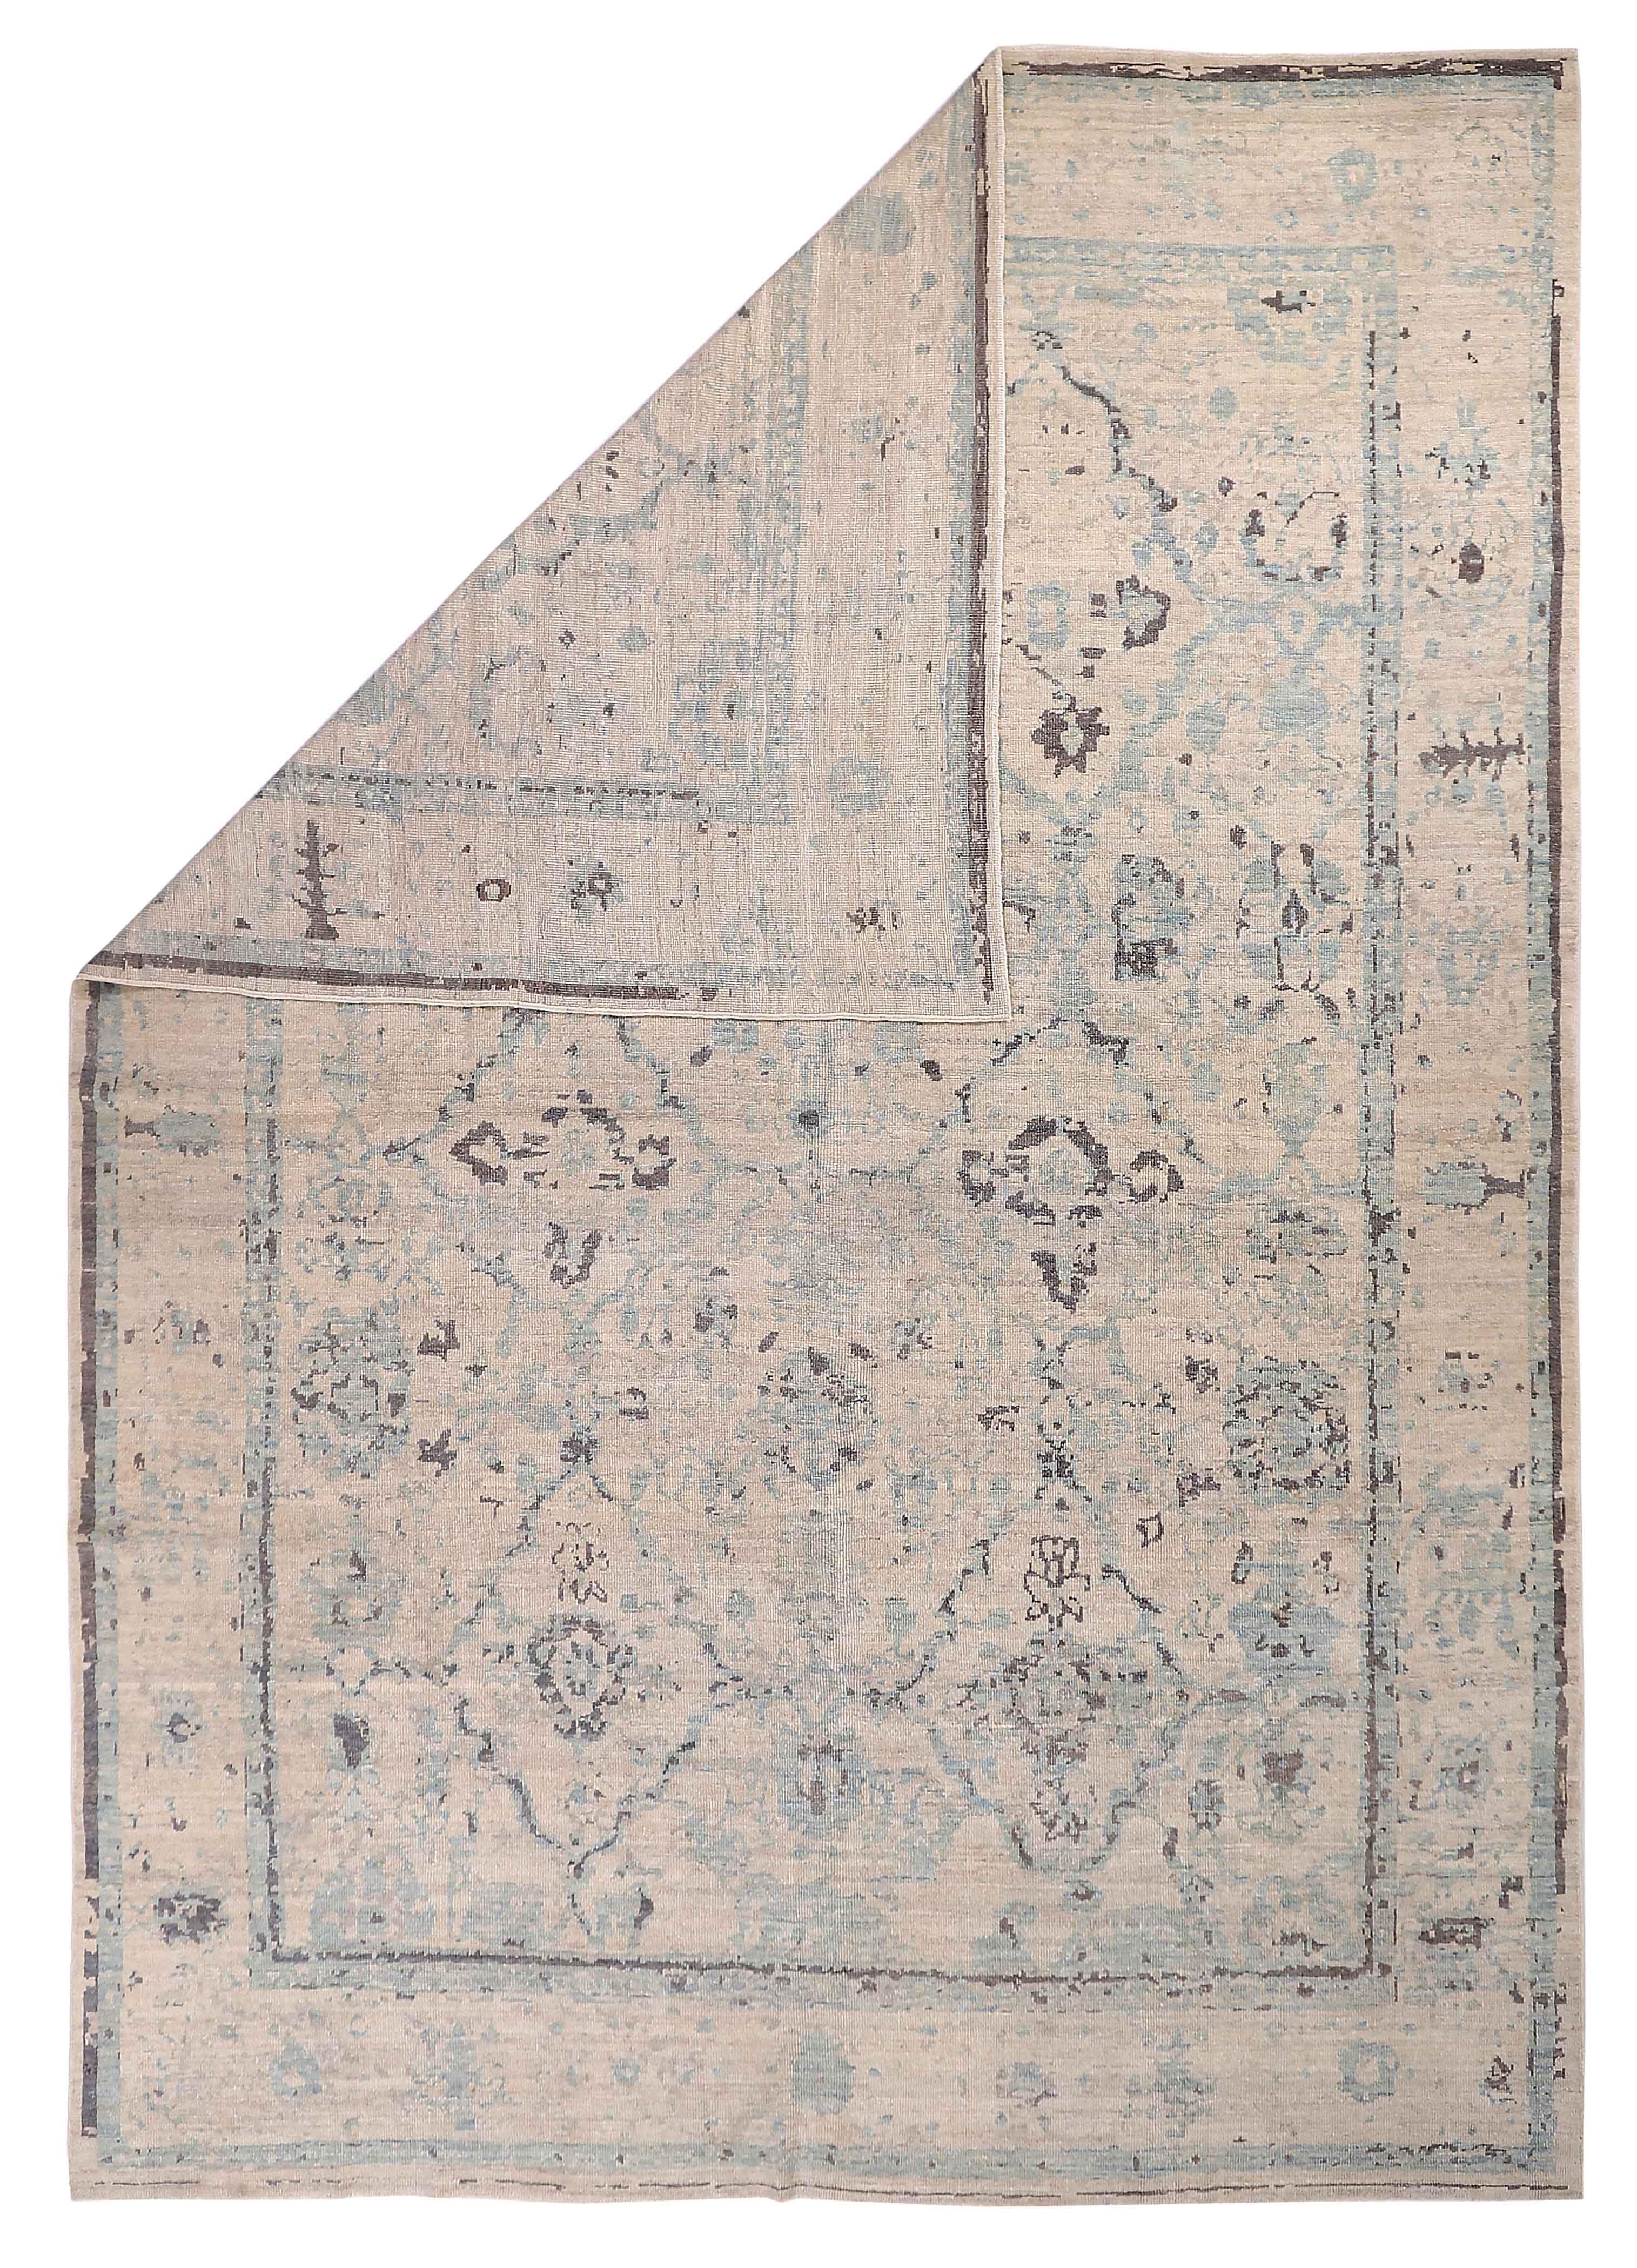 New Persian rug made of handwoven sheep’s wool of the finest quality. It’s colored with organic vegetable dyes that are certified safe for humans and pets alike. It features blue and gray floral details all-over associated with Oushak weaving from